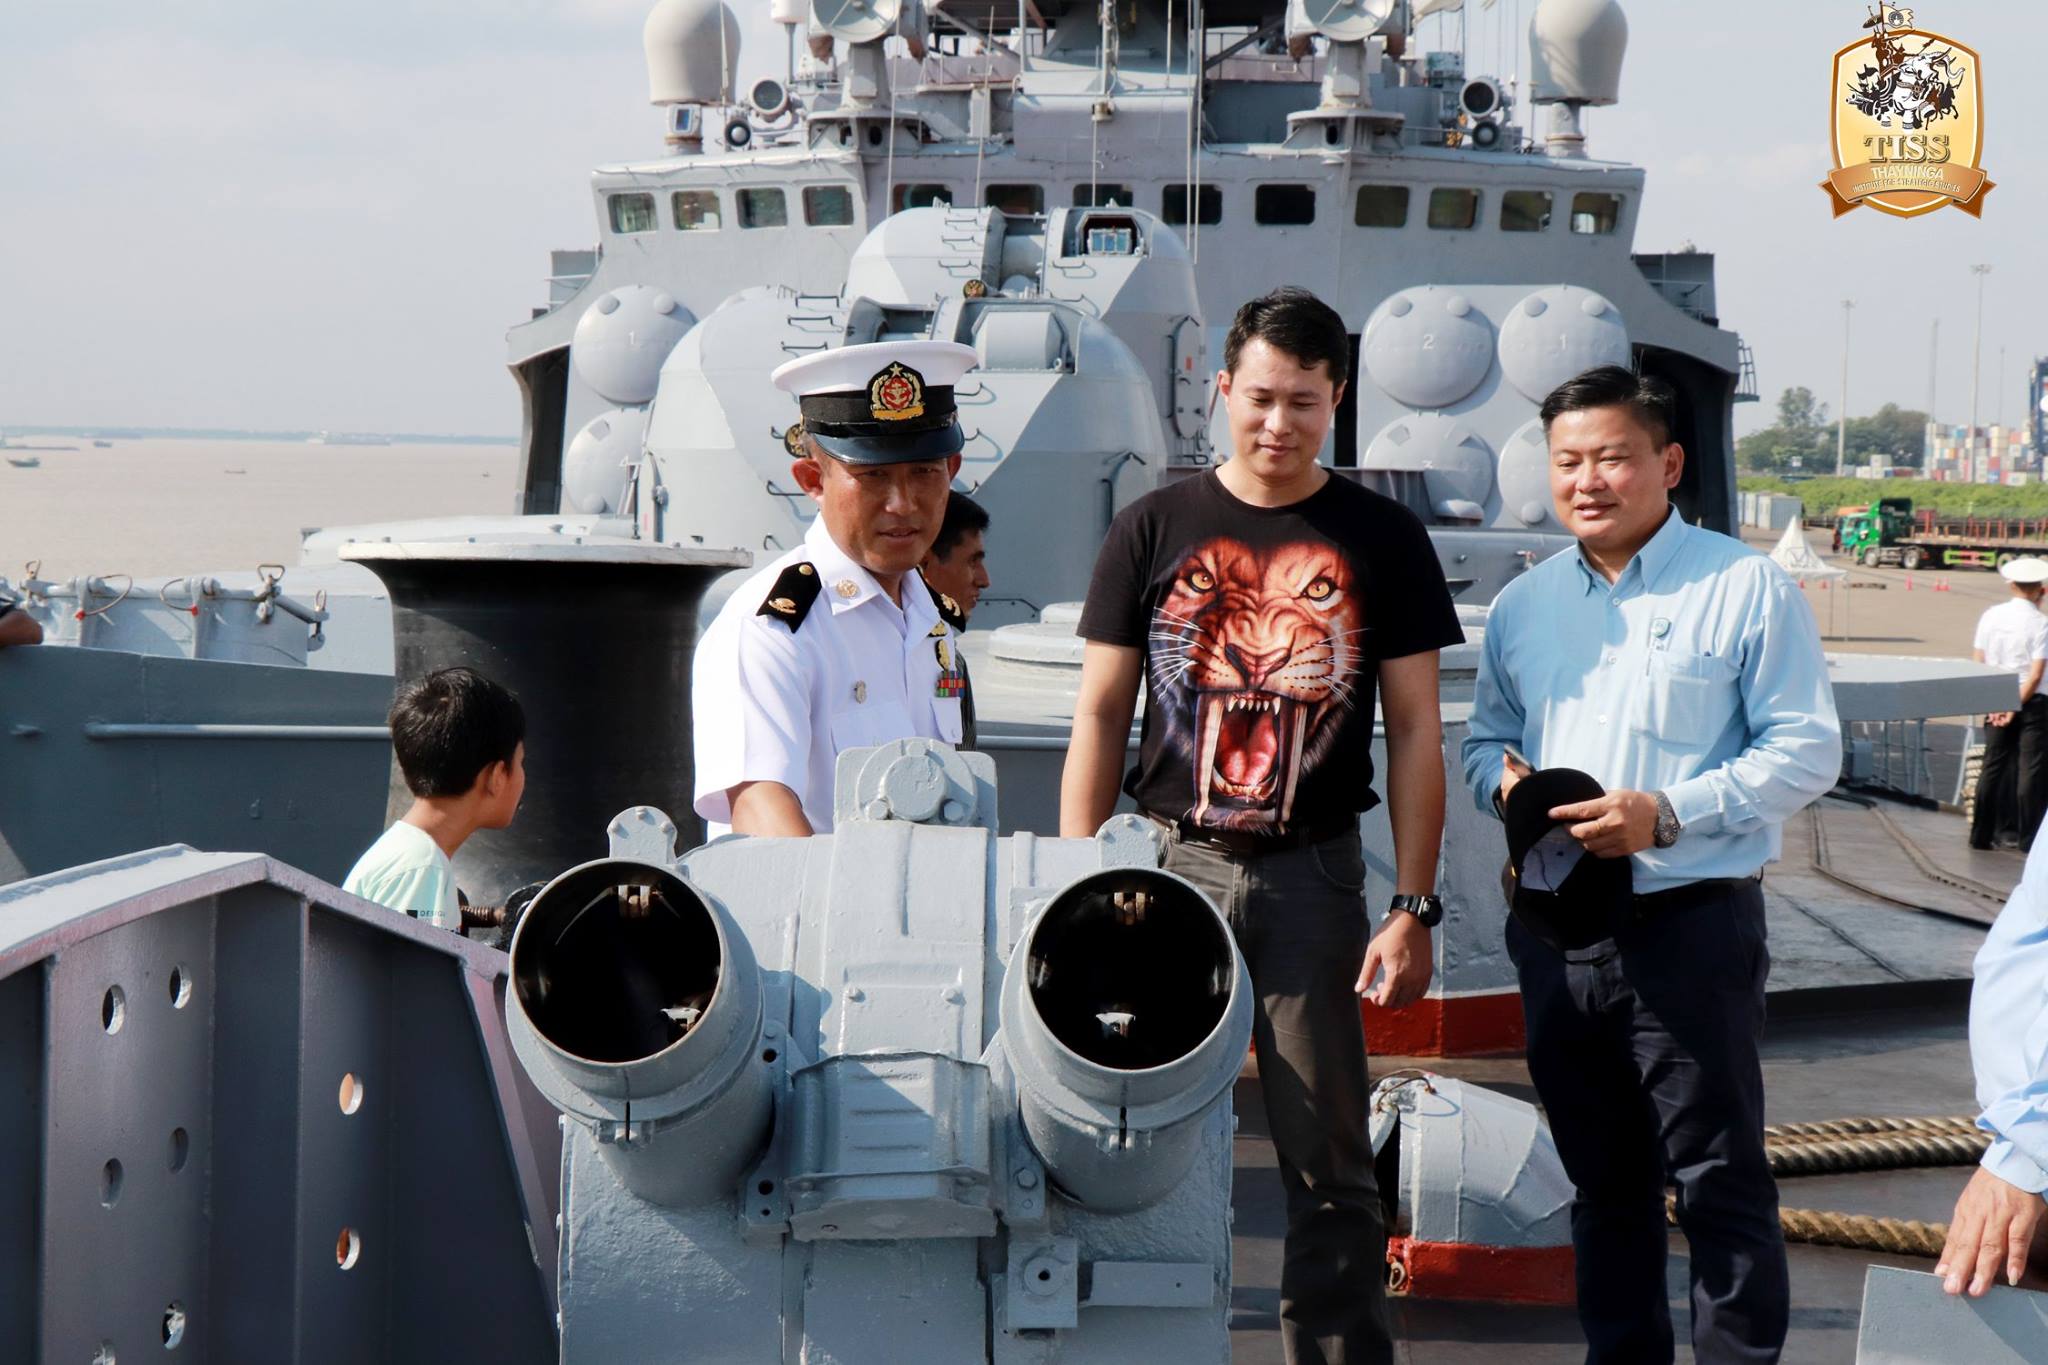 Yangon residents visit the Russian destroyer on Dec. 9, 2017. Photo: Thayninga Institute for Strategic Studies